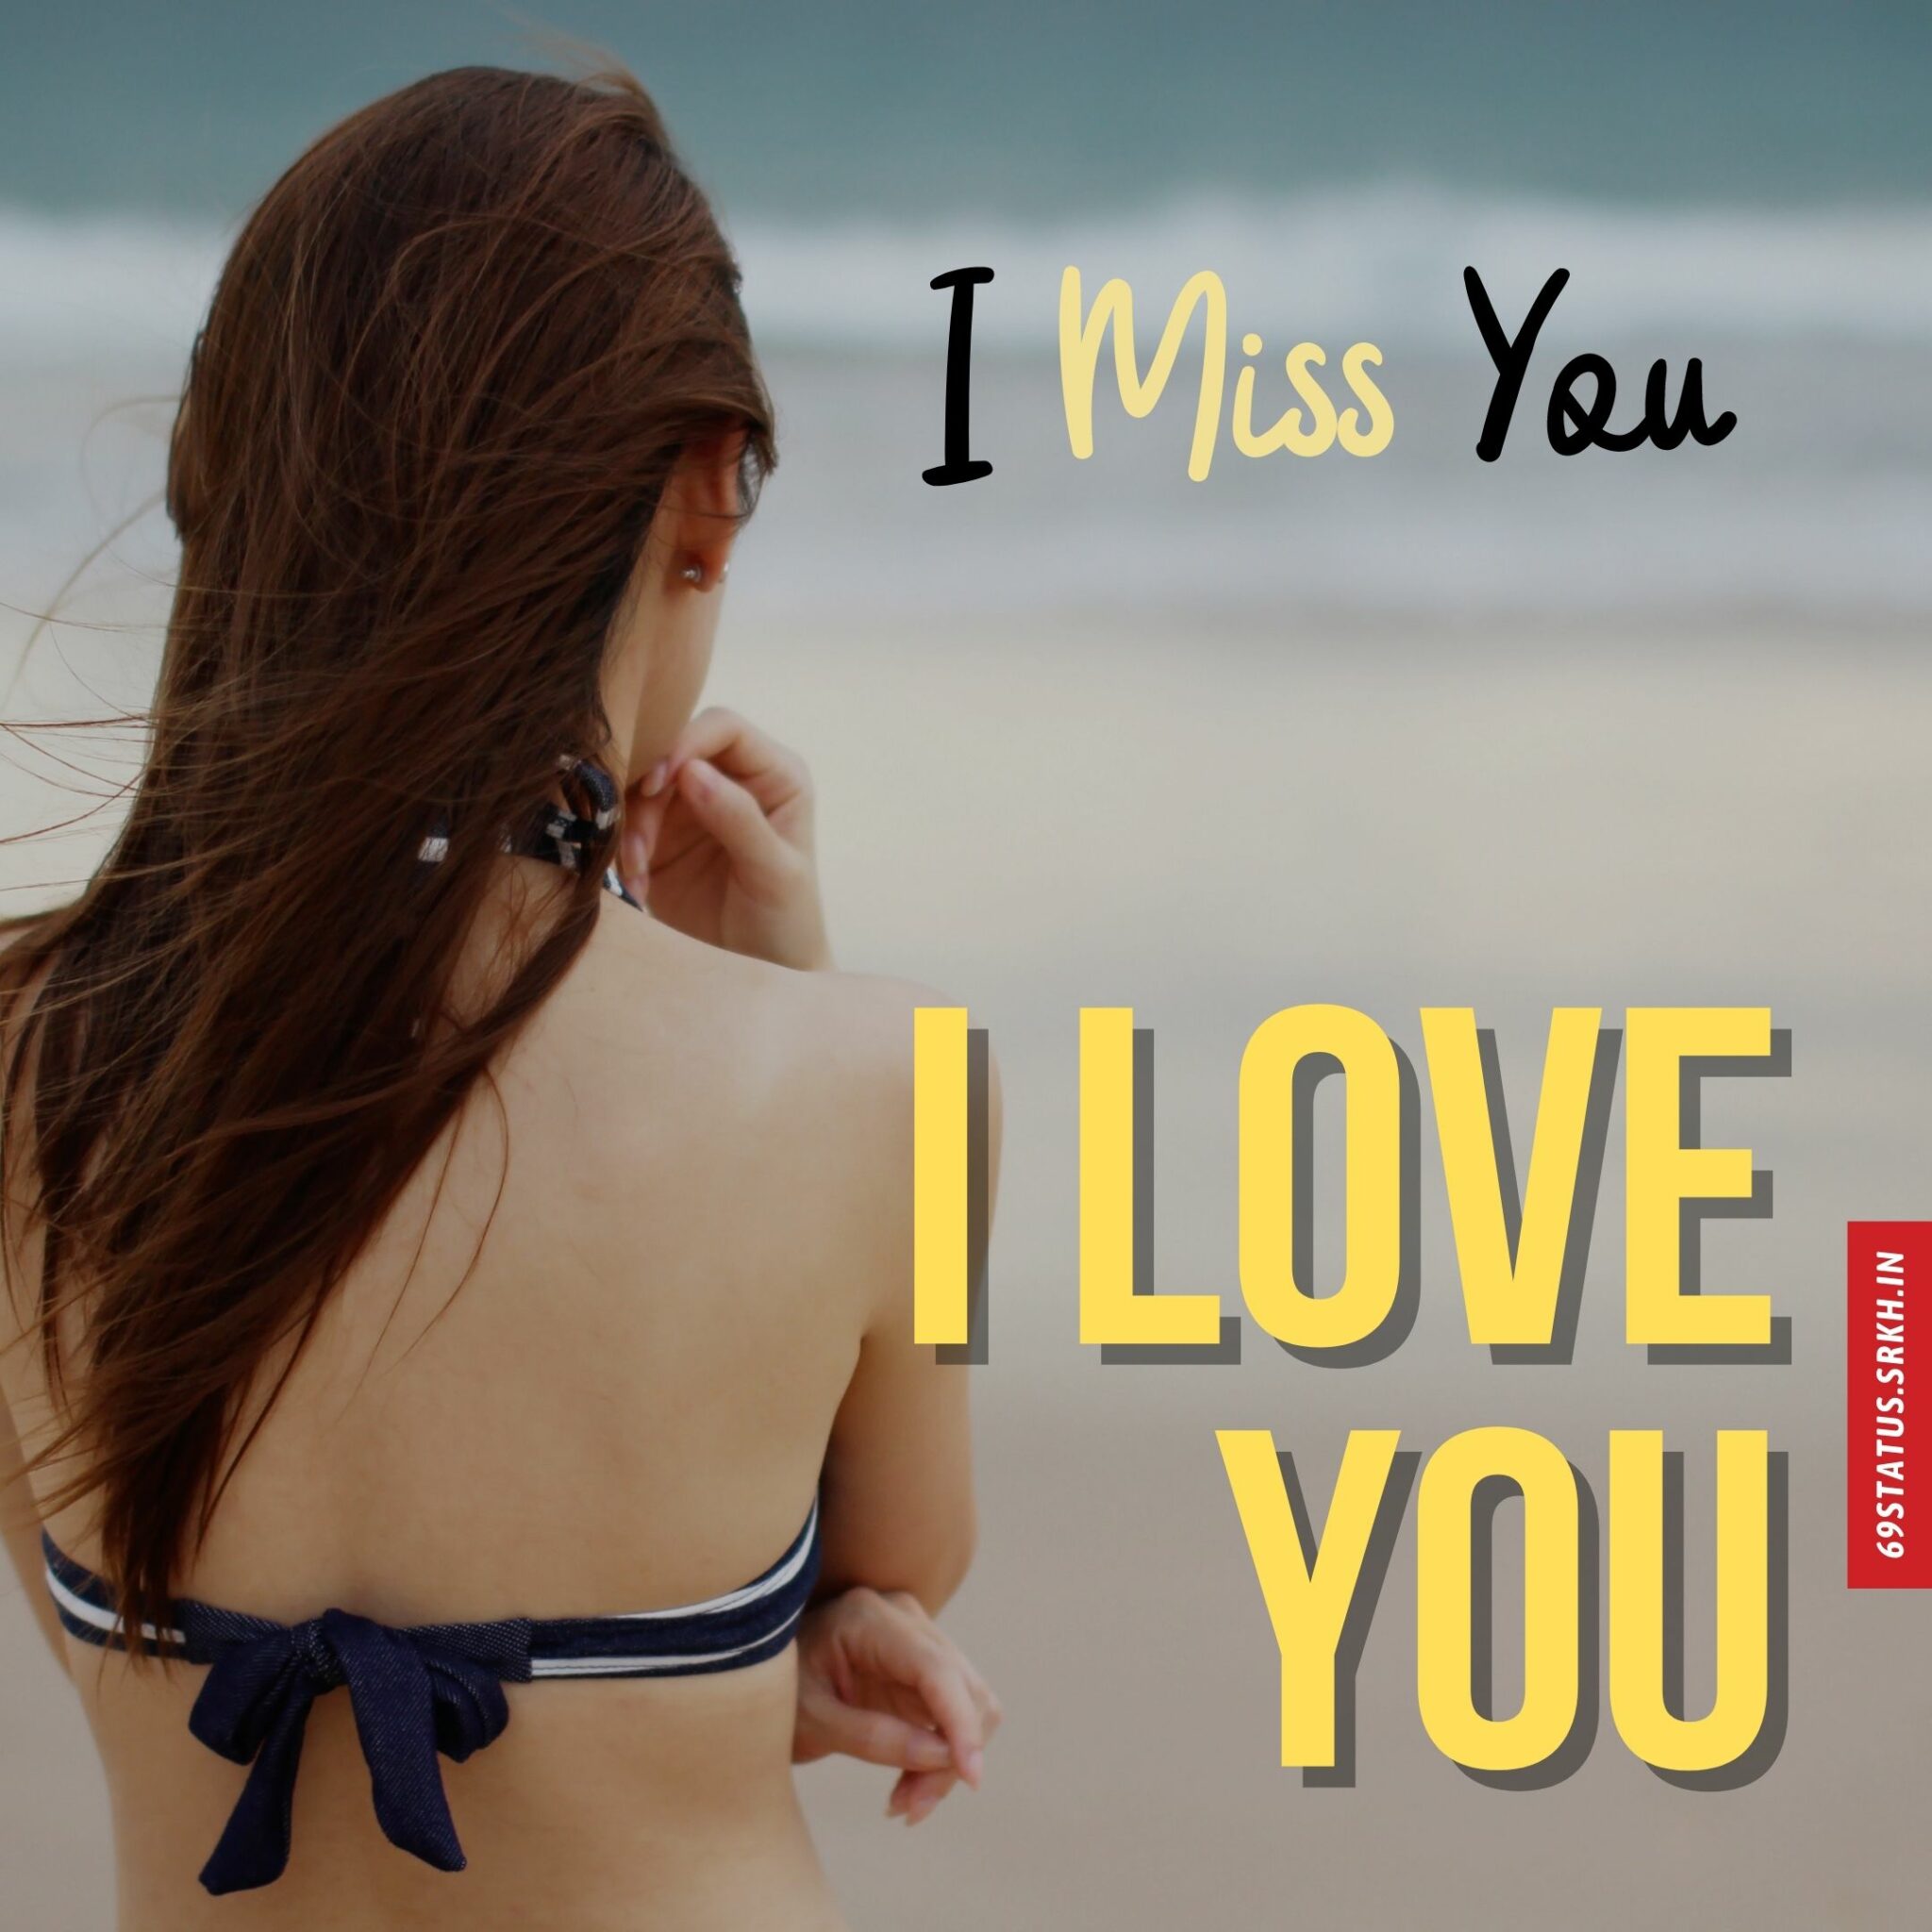 I Love You miss you images